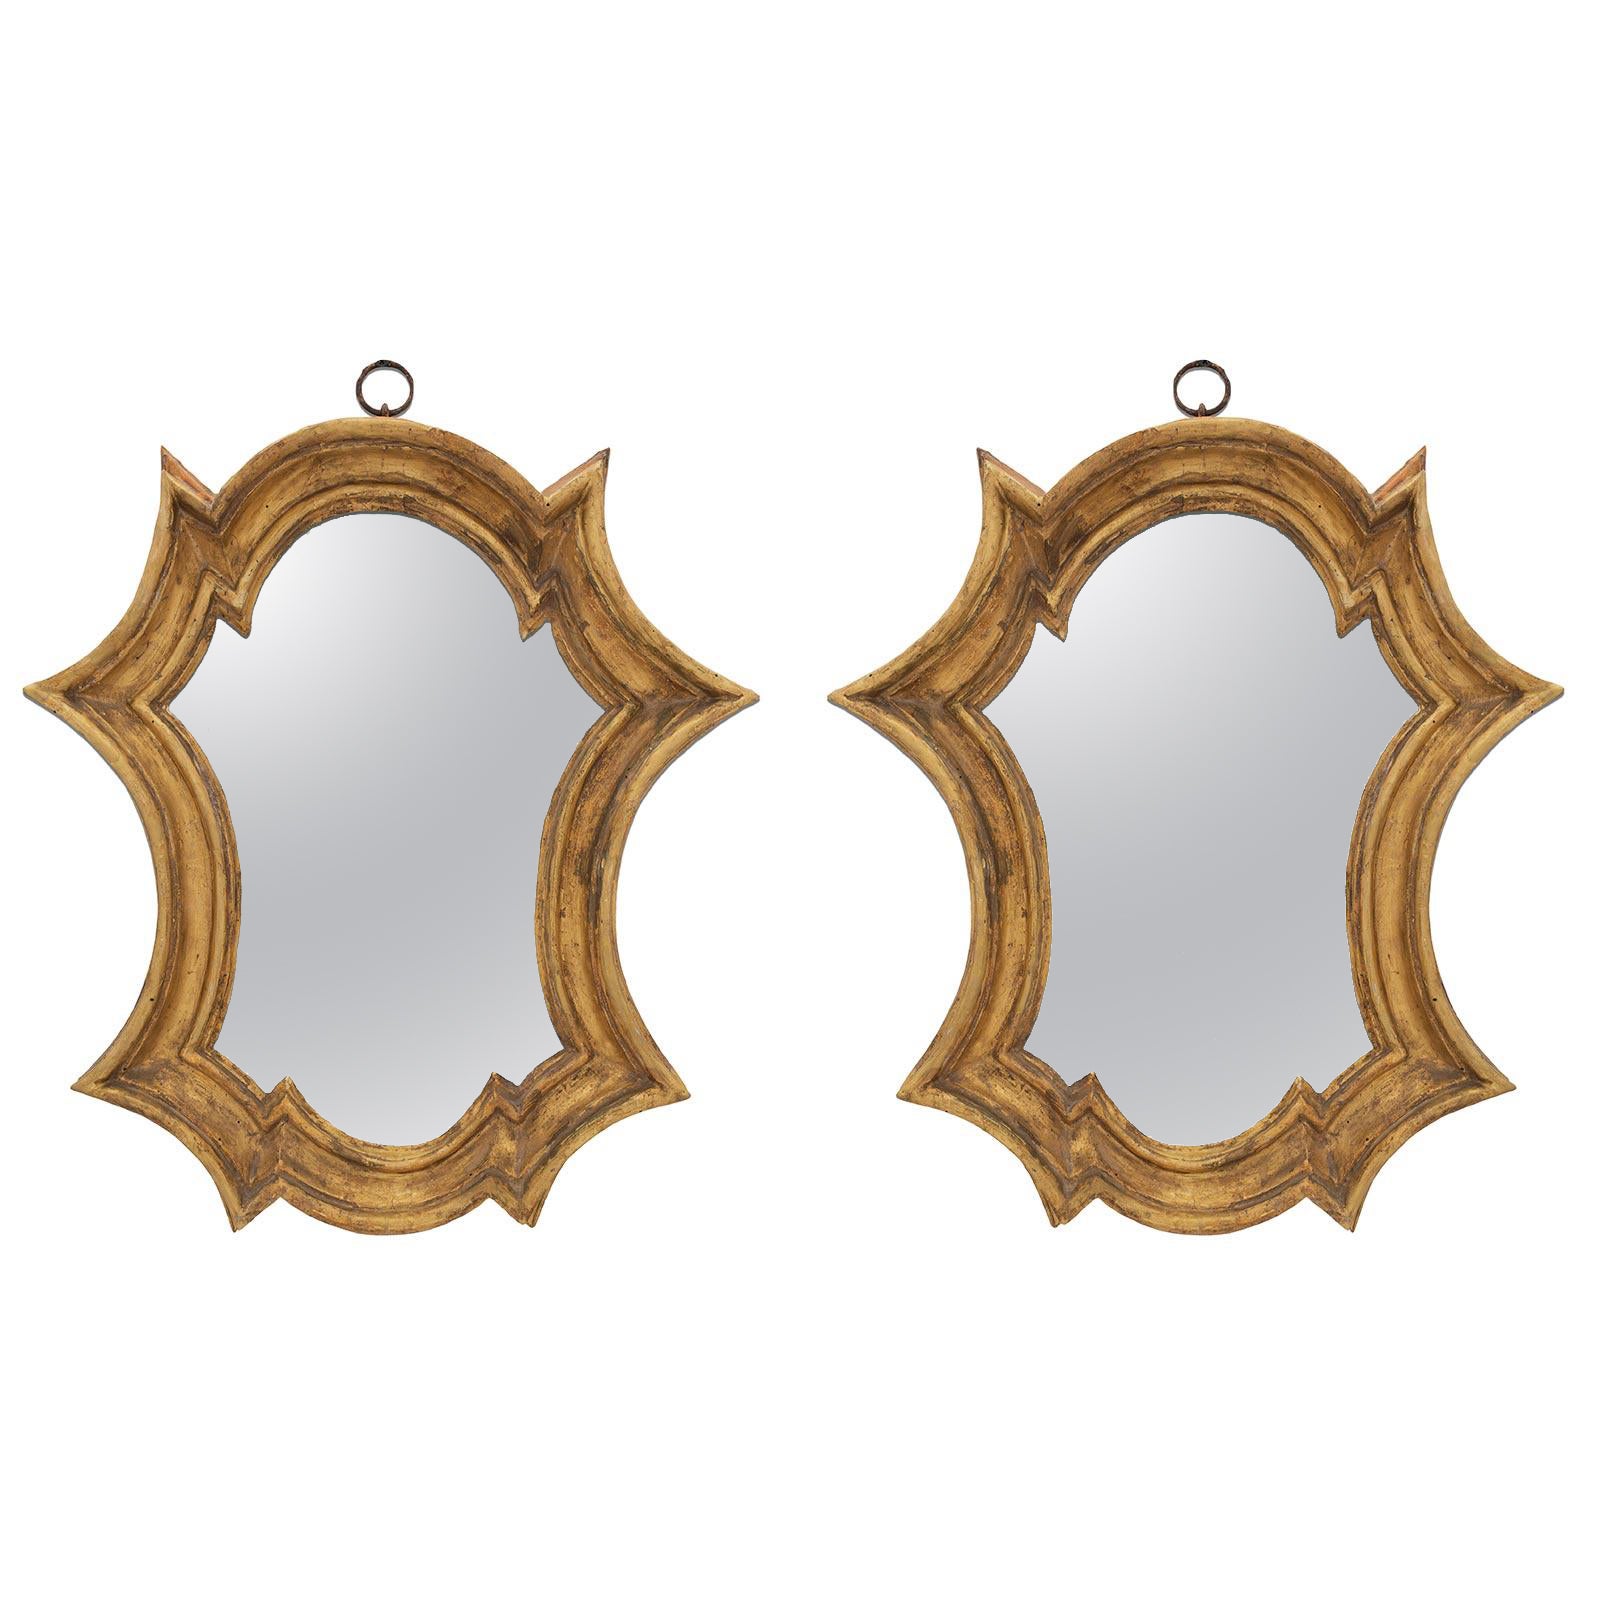 Pair of Early 18th Century Italian Baroque Period Mirrors For Sale